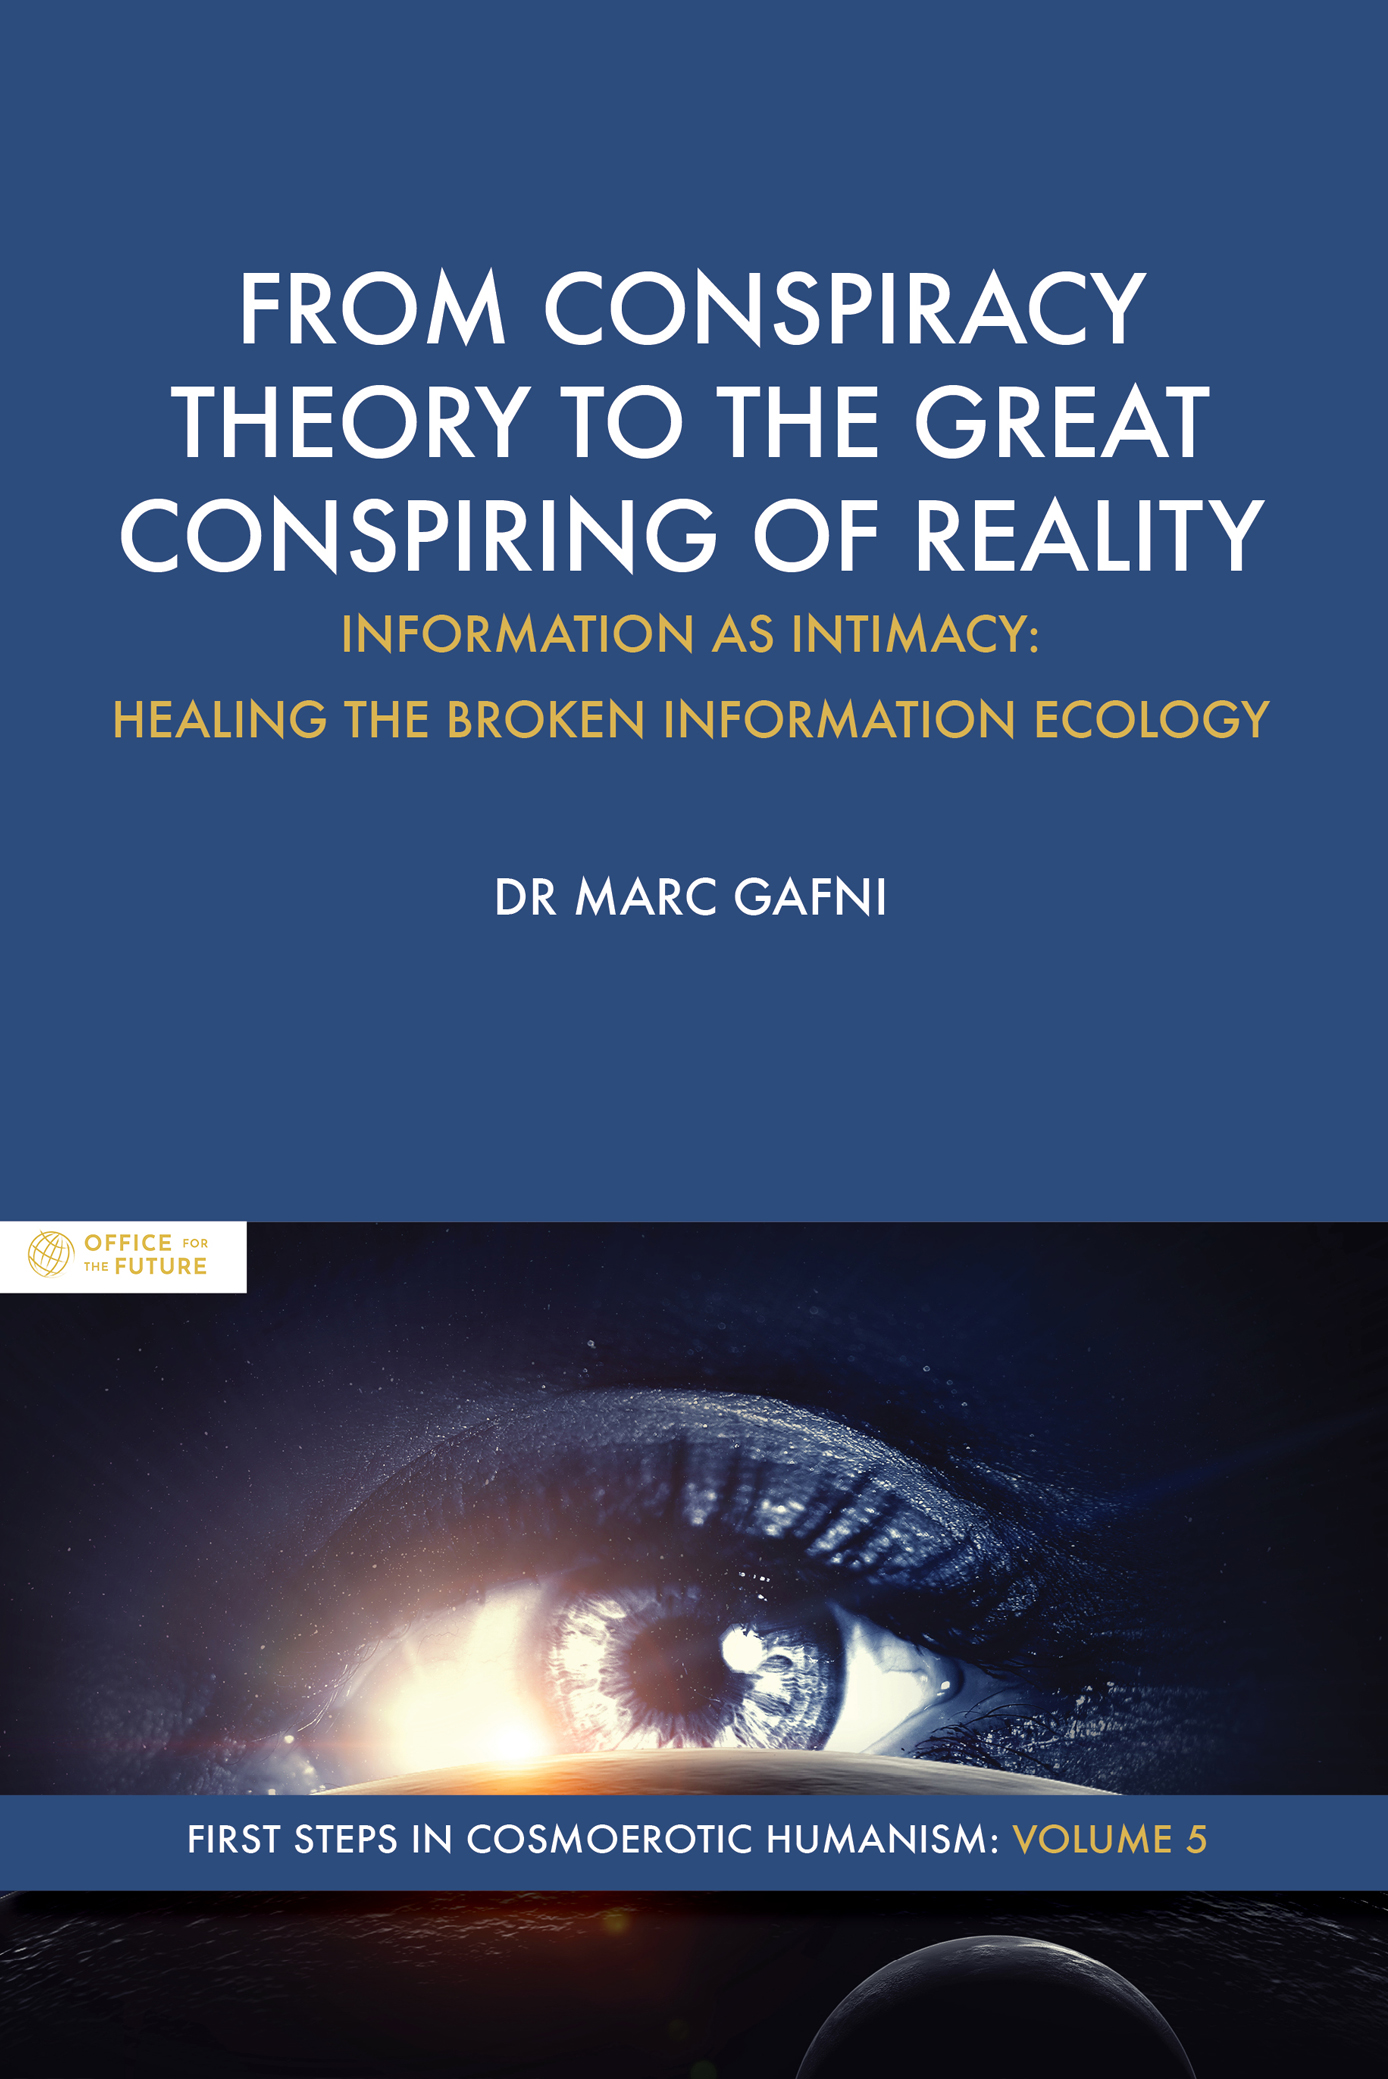 From conspiracy theory to the great conspiring of reality